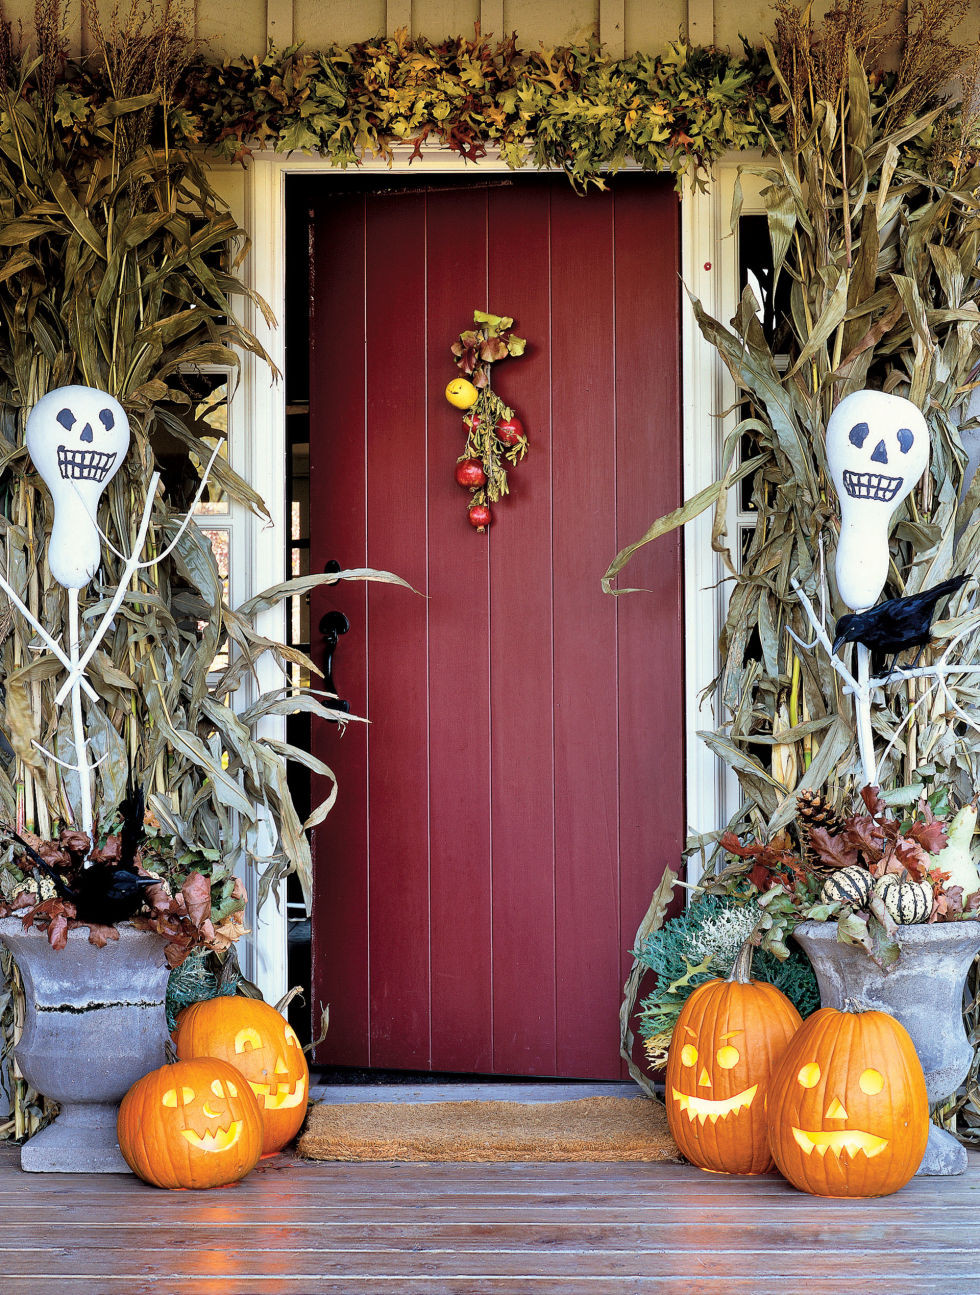 Halloween Outdoor Decorations Ideas
 11 Awesome Outdoor Halloween Decoration Ideas Awesome 11